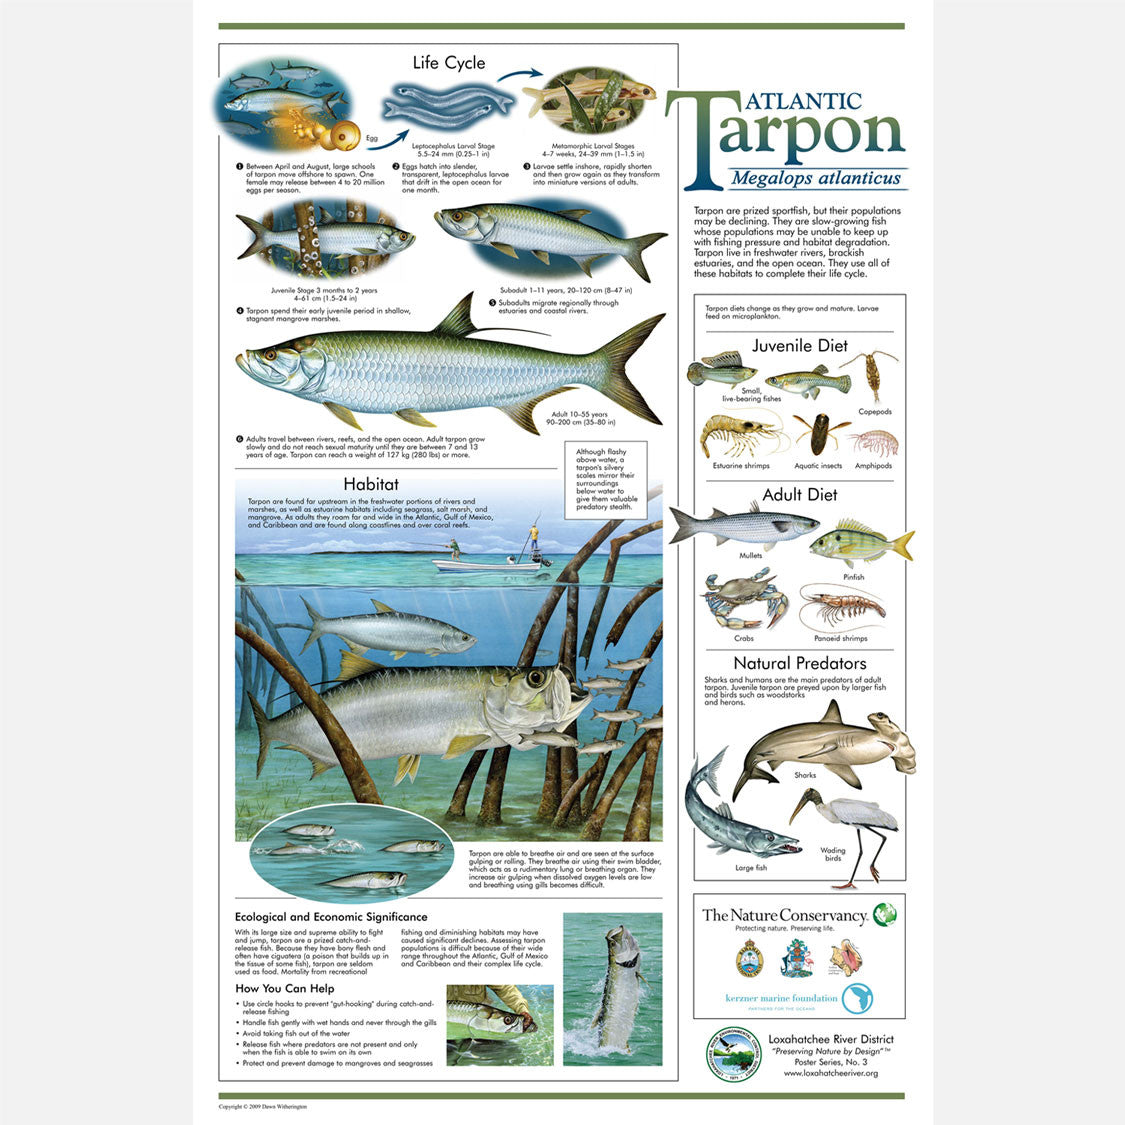 This beautiful poster provides information about the Atlantic Tarpon, Megalops atlanticus.